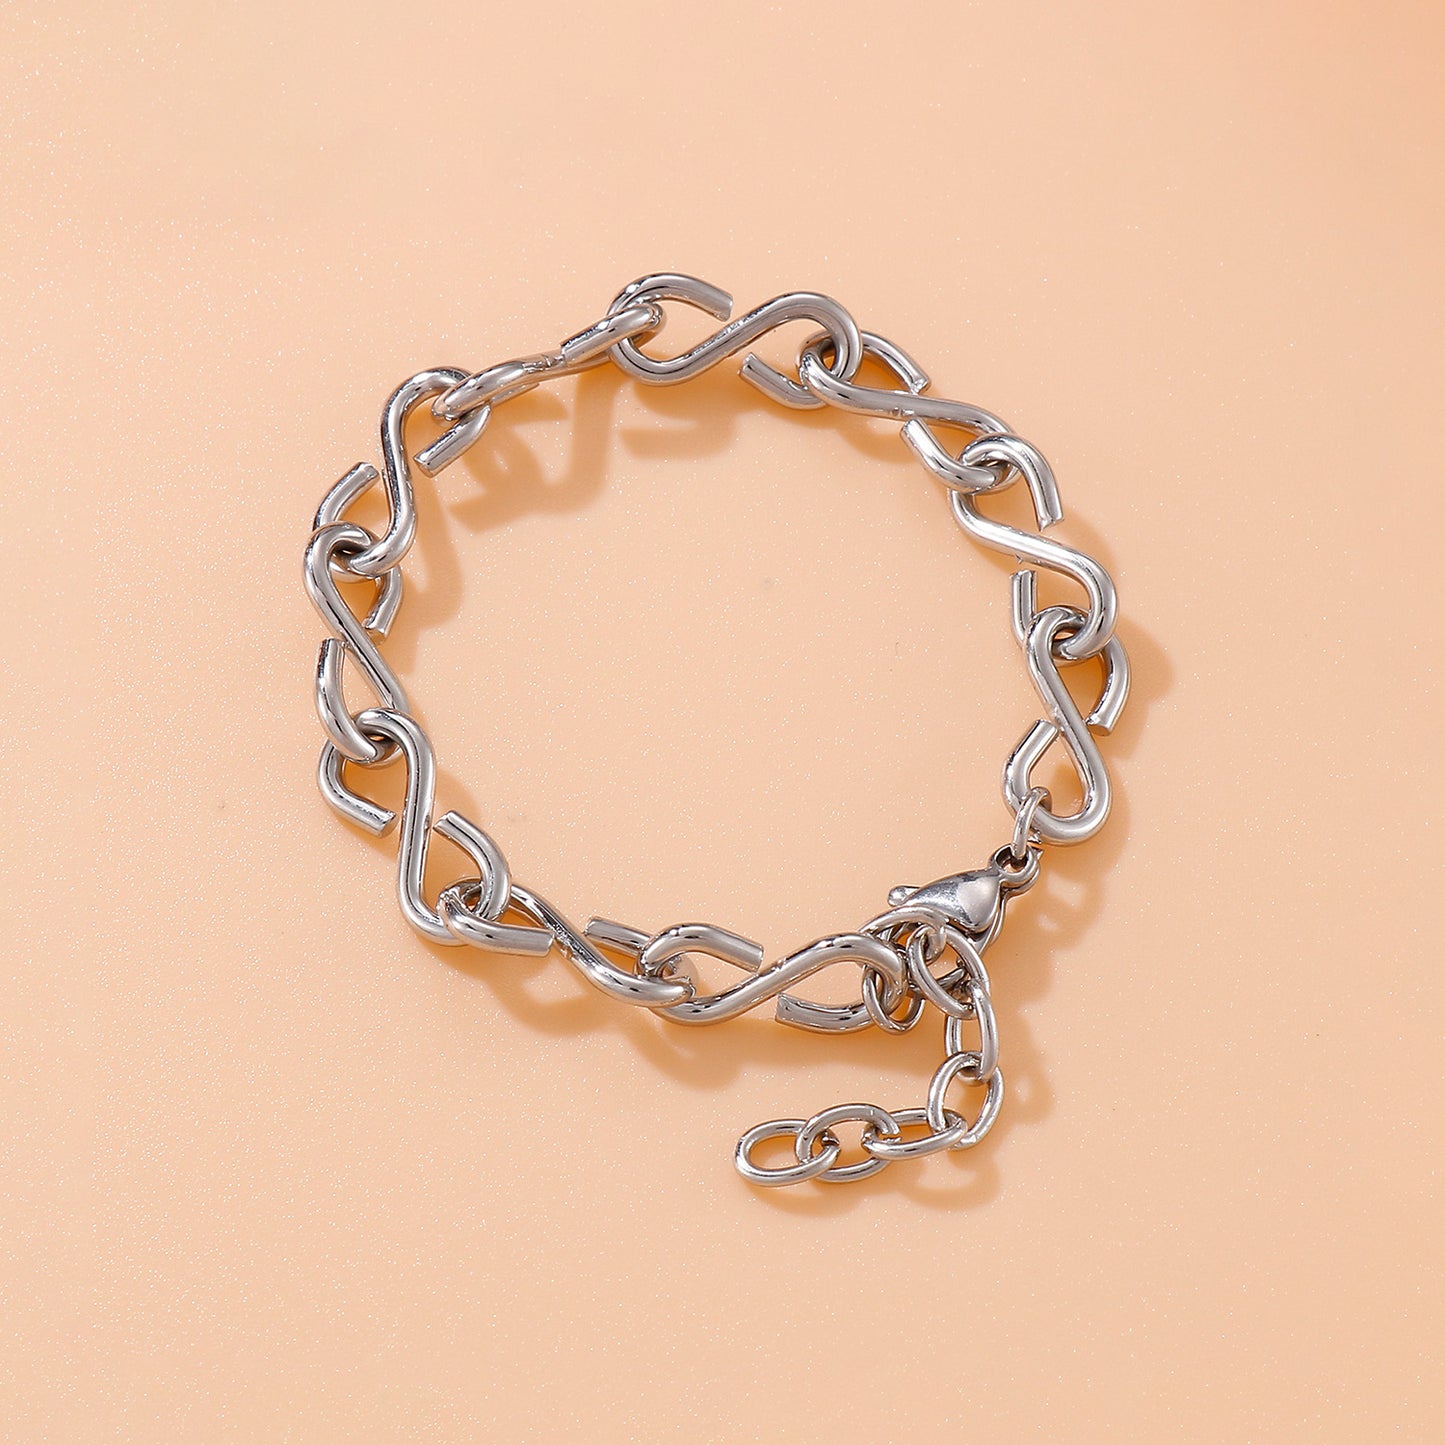 Stainless Steel Figure 8 Chain Link Bracelet Silver One Size